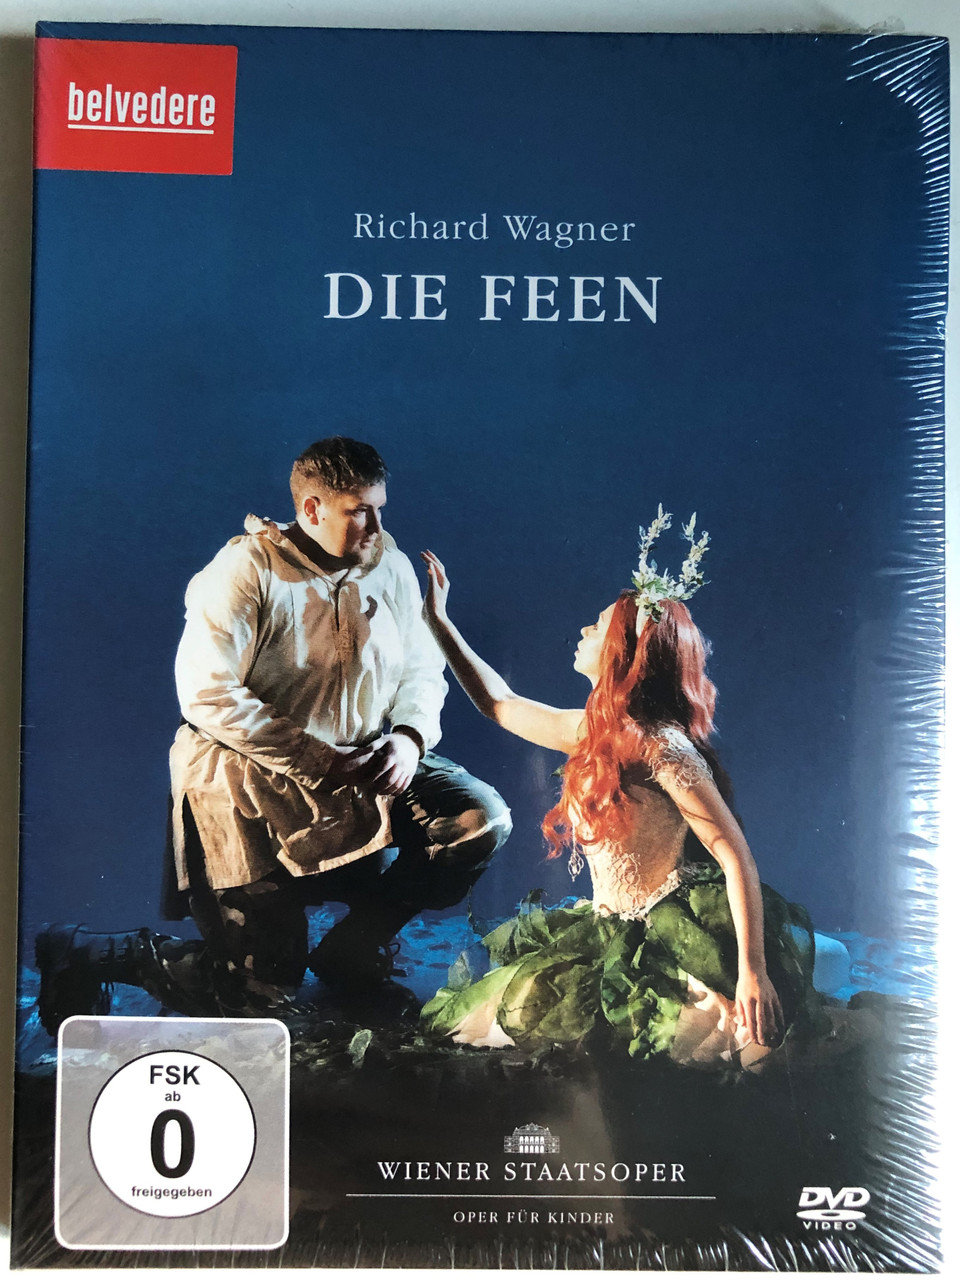 Wagner_Die_Feen_THE_FAIRIES_-_Adapted_for_Children_Great_romantic_opera_in_three_acts_adapted_for_children_Al_Childrens_Opera_Tent_Stage_Orchestra_of_the_Vienna_State_Oper___82538.1691751678.1280.1280.JPG (960×1280)